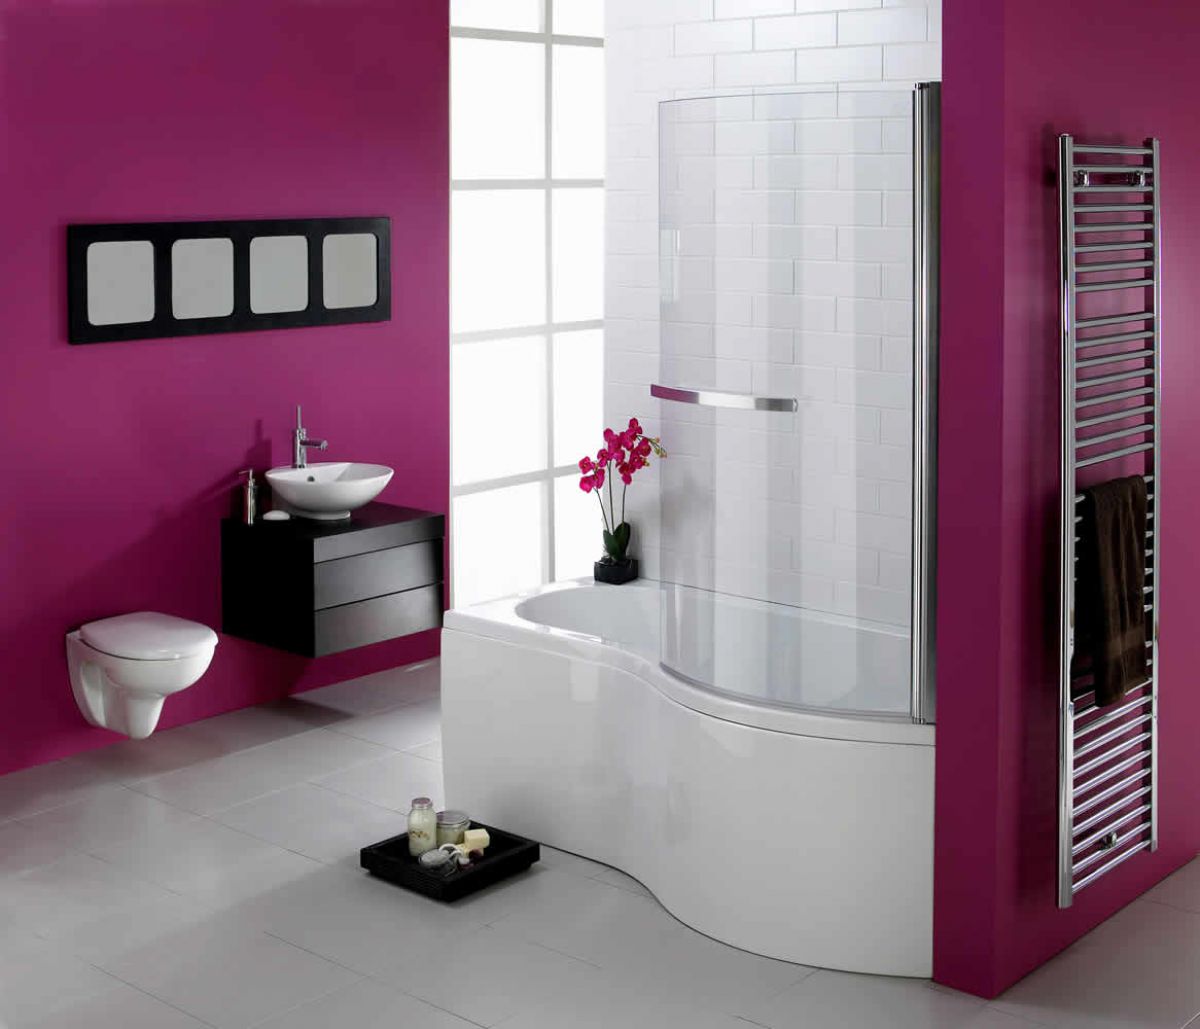 image example of a shower bath